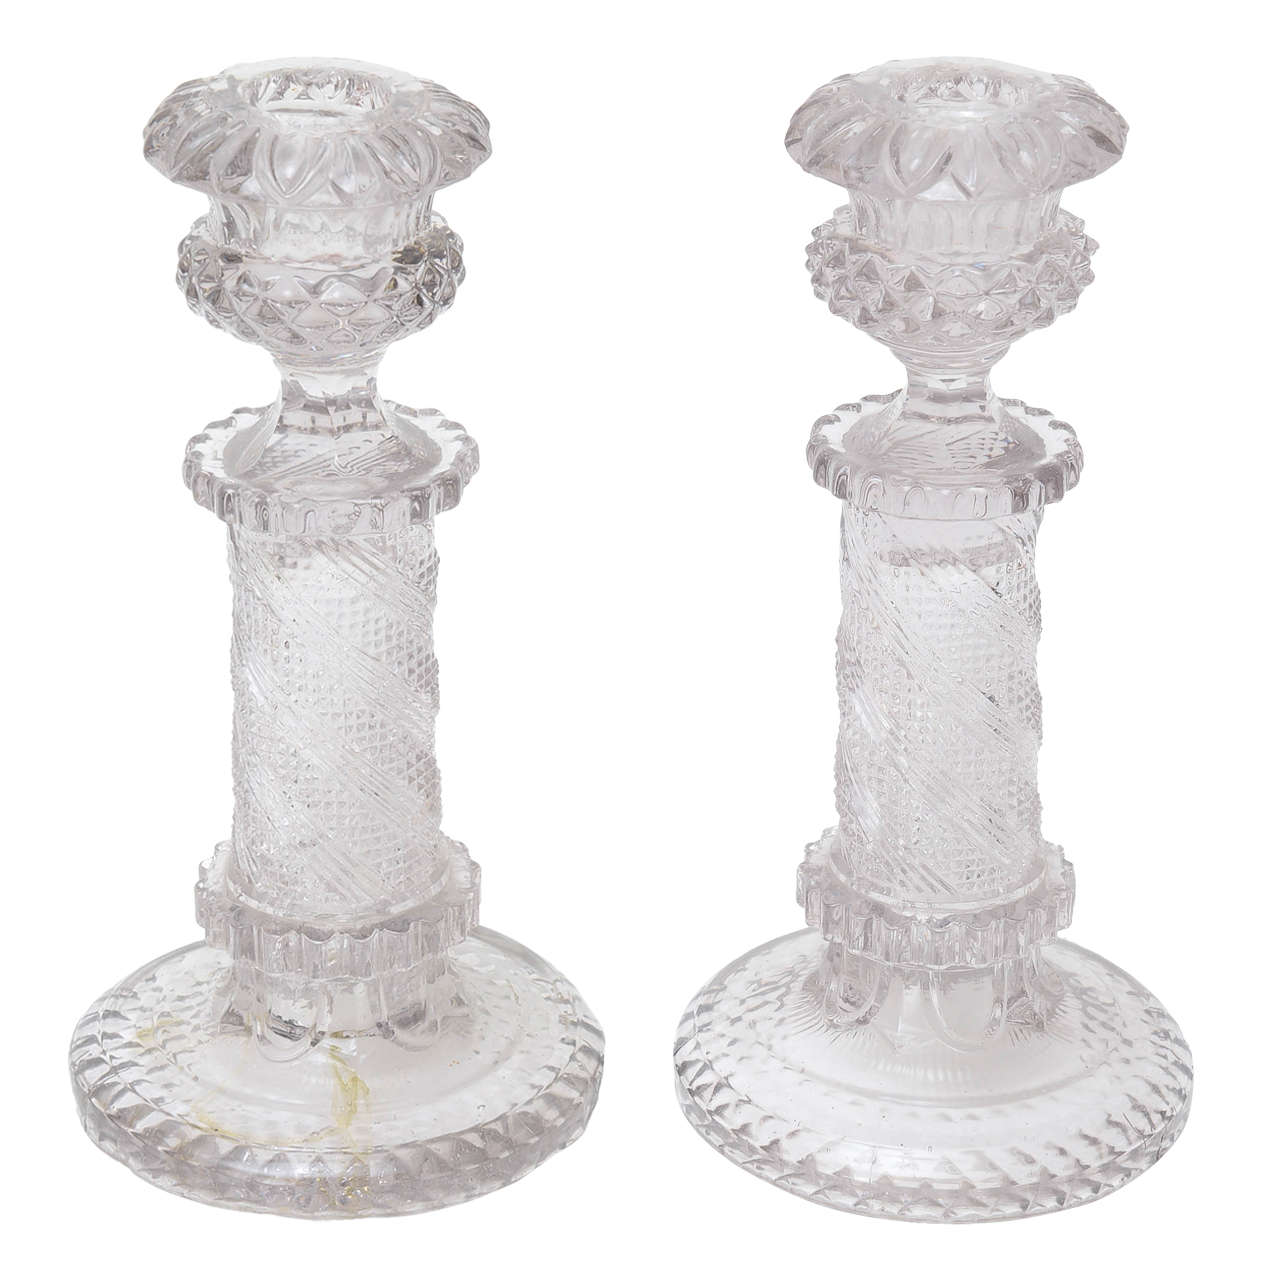 Pair of William IV Heavy Leaded Candlesticks